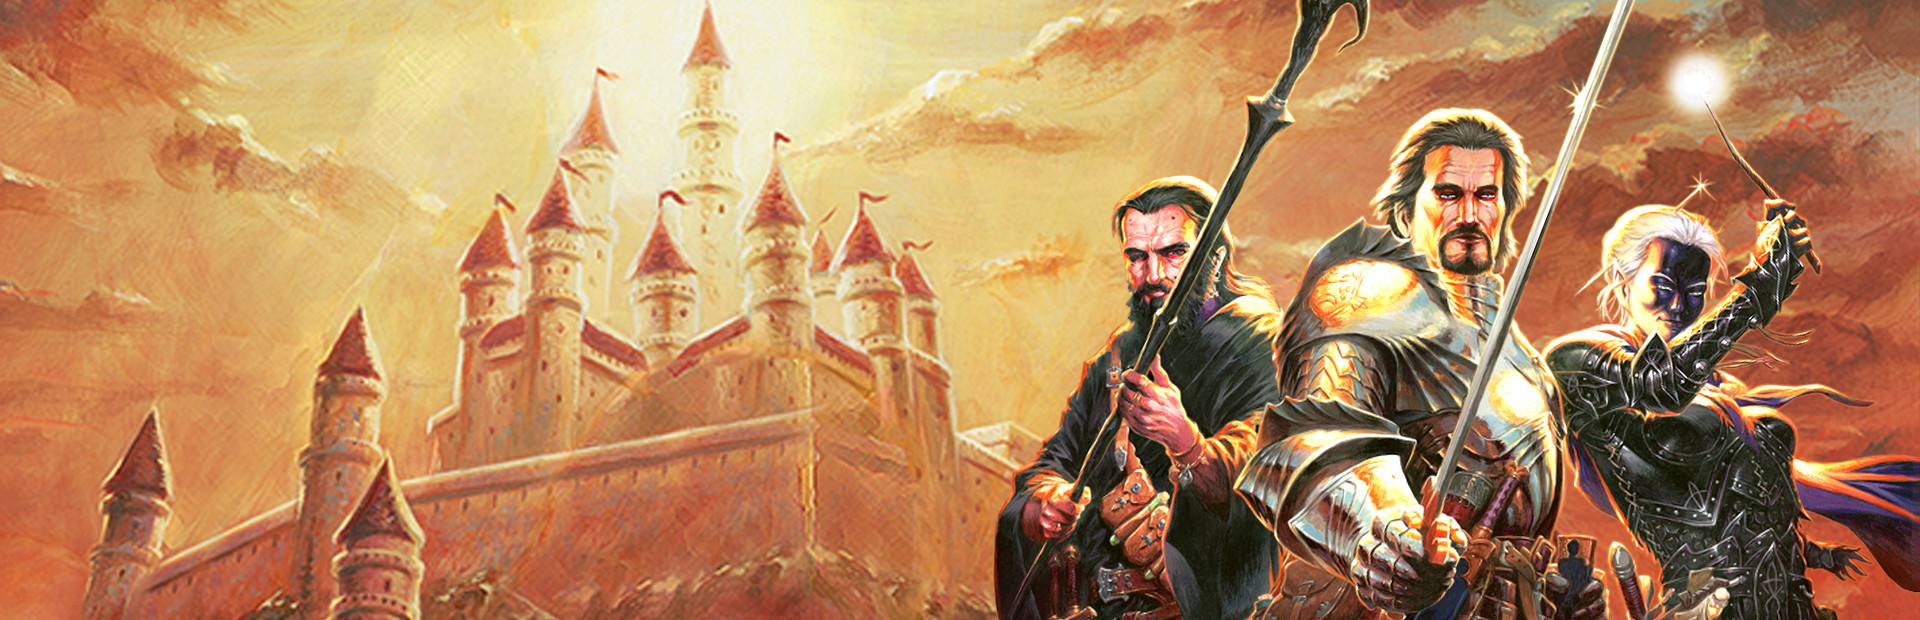 D&D Lords of Waterdeep cover image